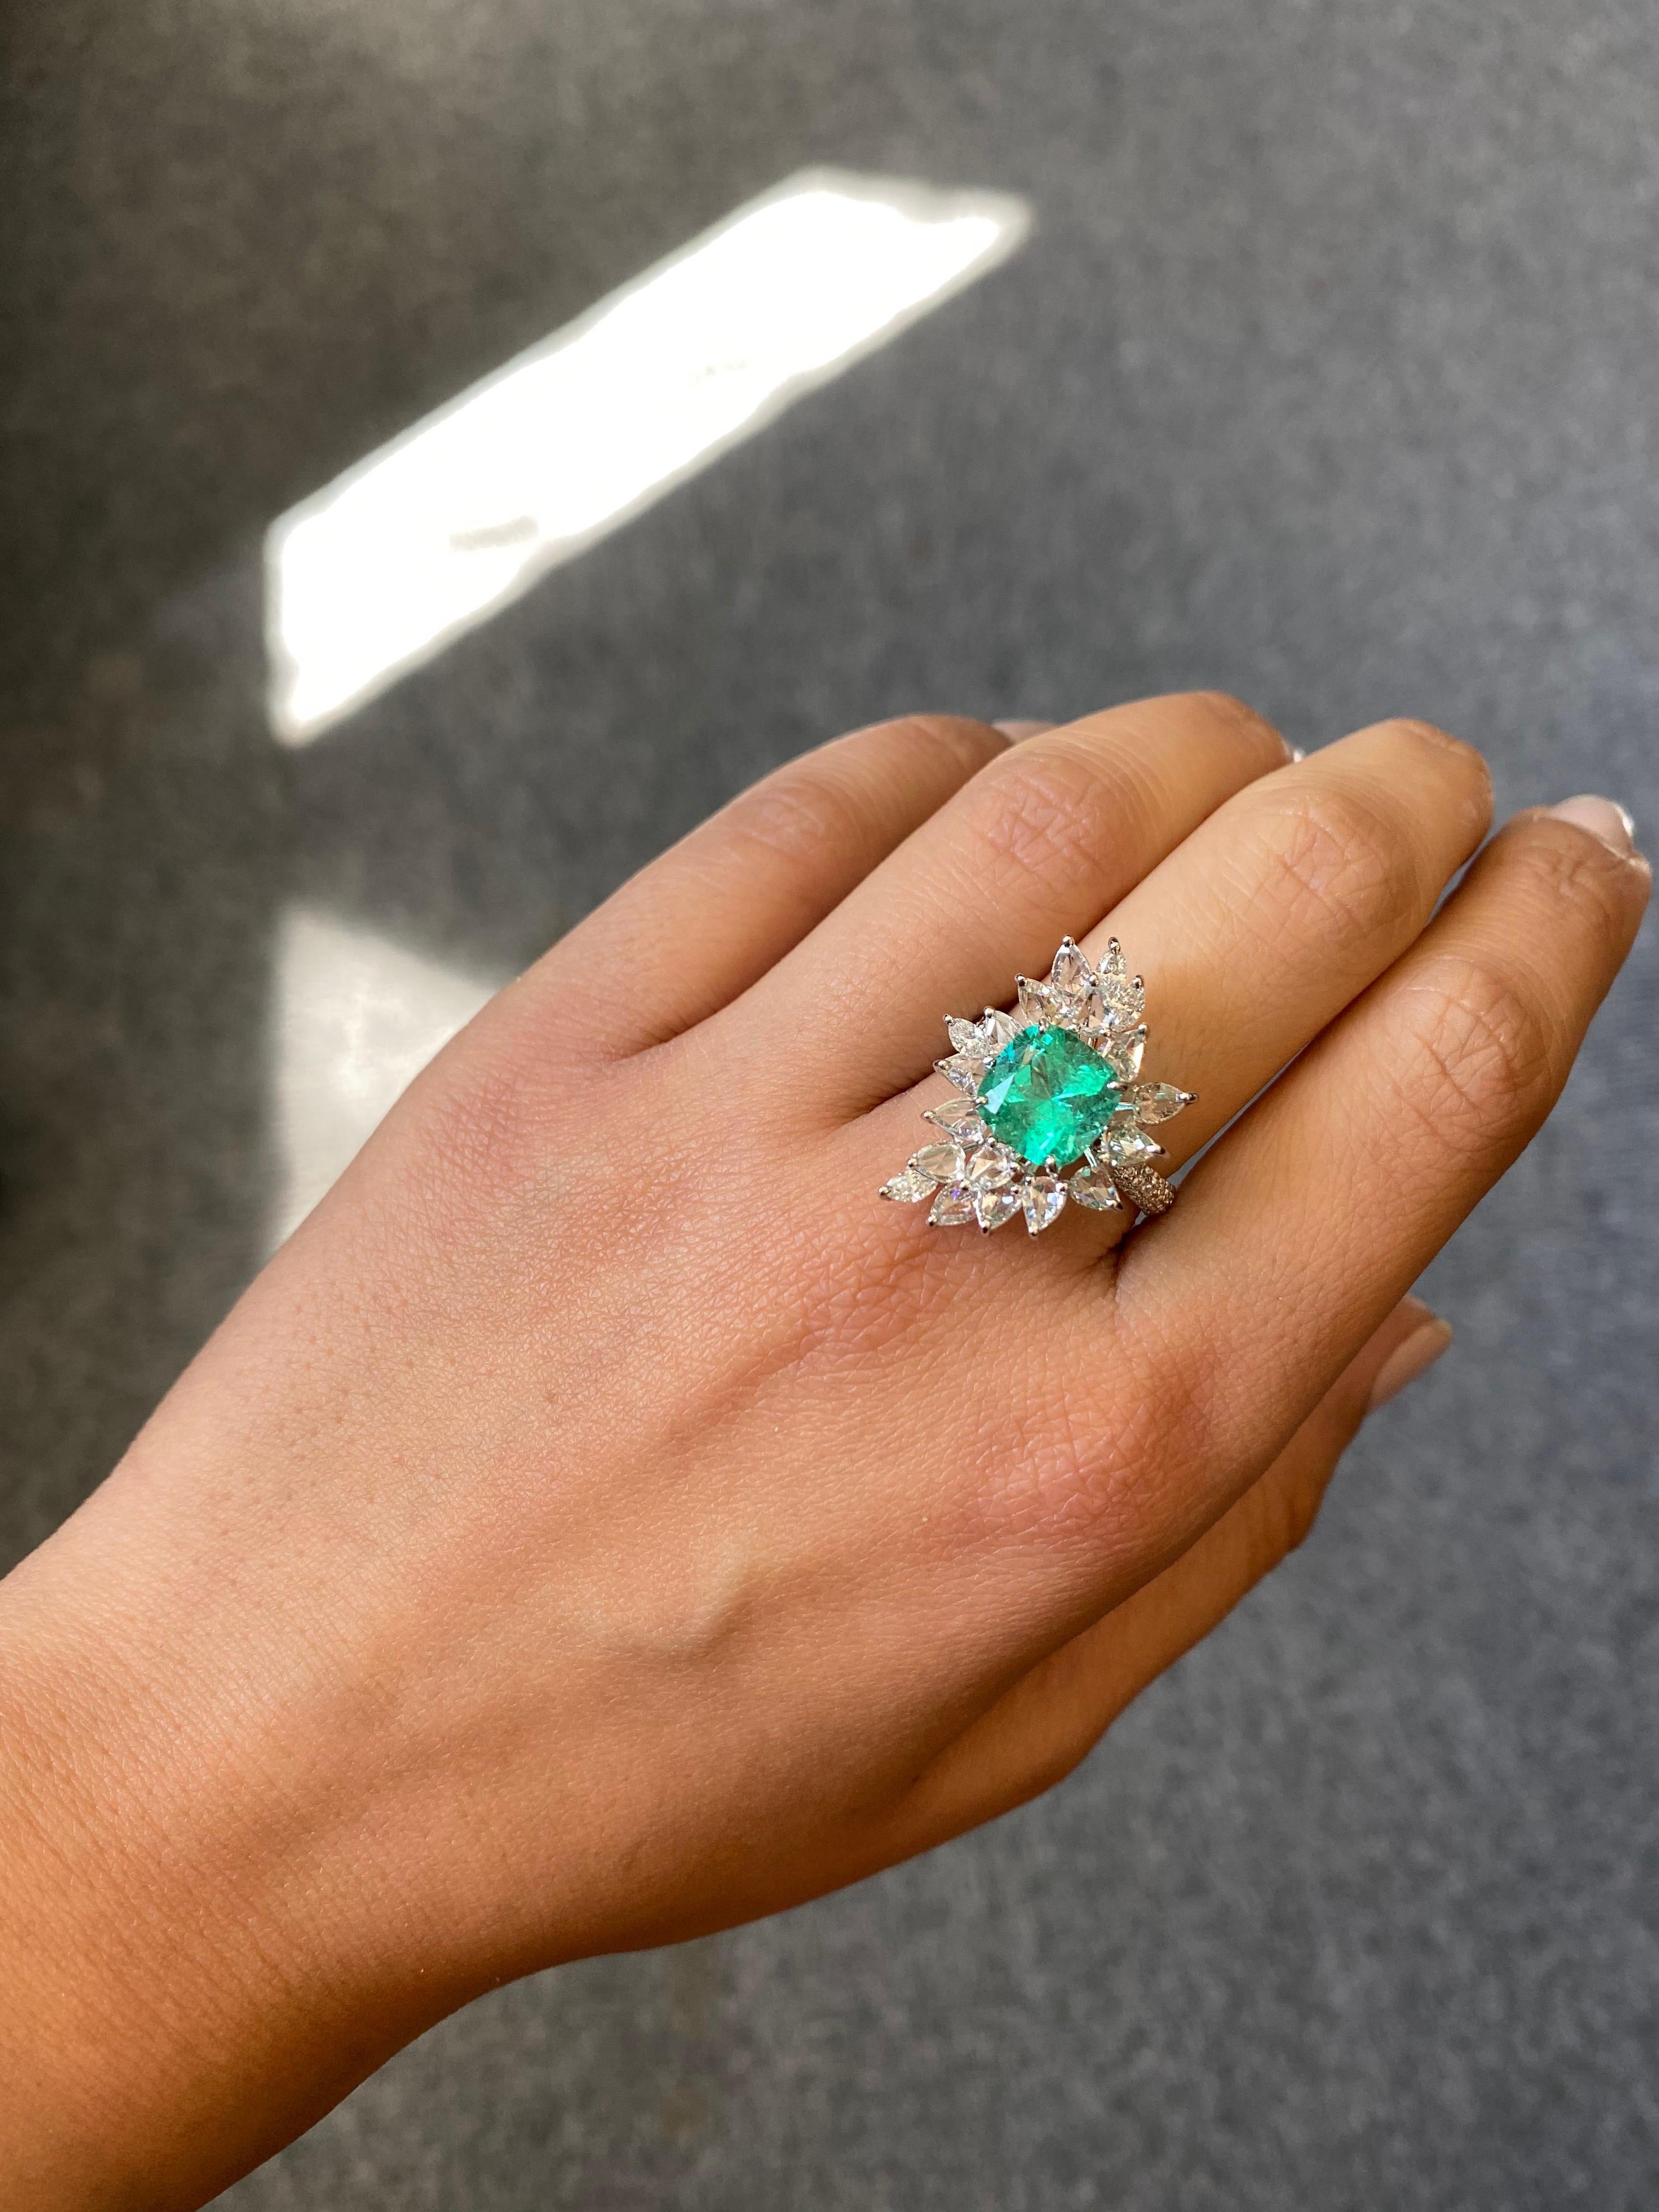 A unique cushion-shaped Colombian Emerald ring, adorned with rose-cut and full-cut marquise and pear shape diamonds all set in 18K white gold. The centre stone has a great lustre, and is completely trasnparent with very few eye-visible inclusions.